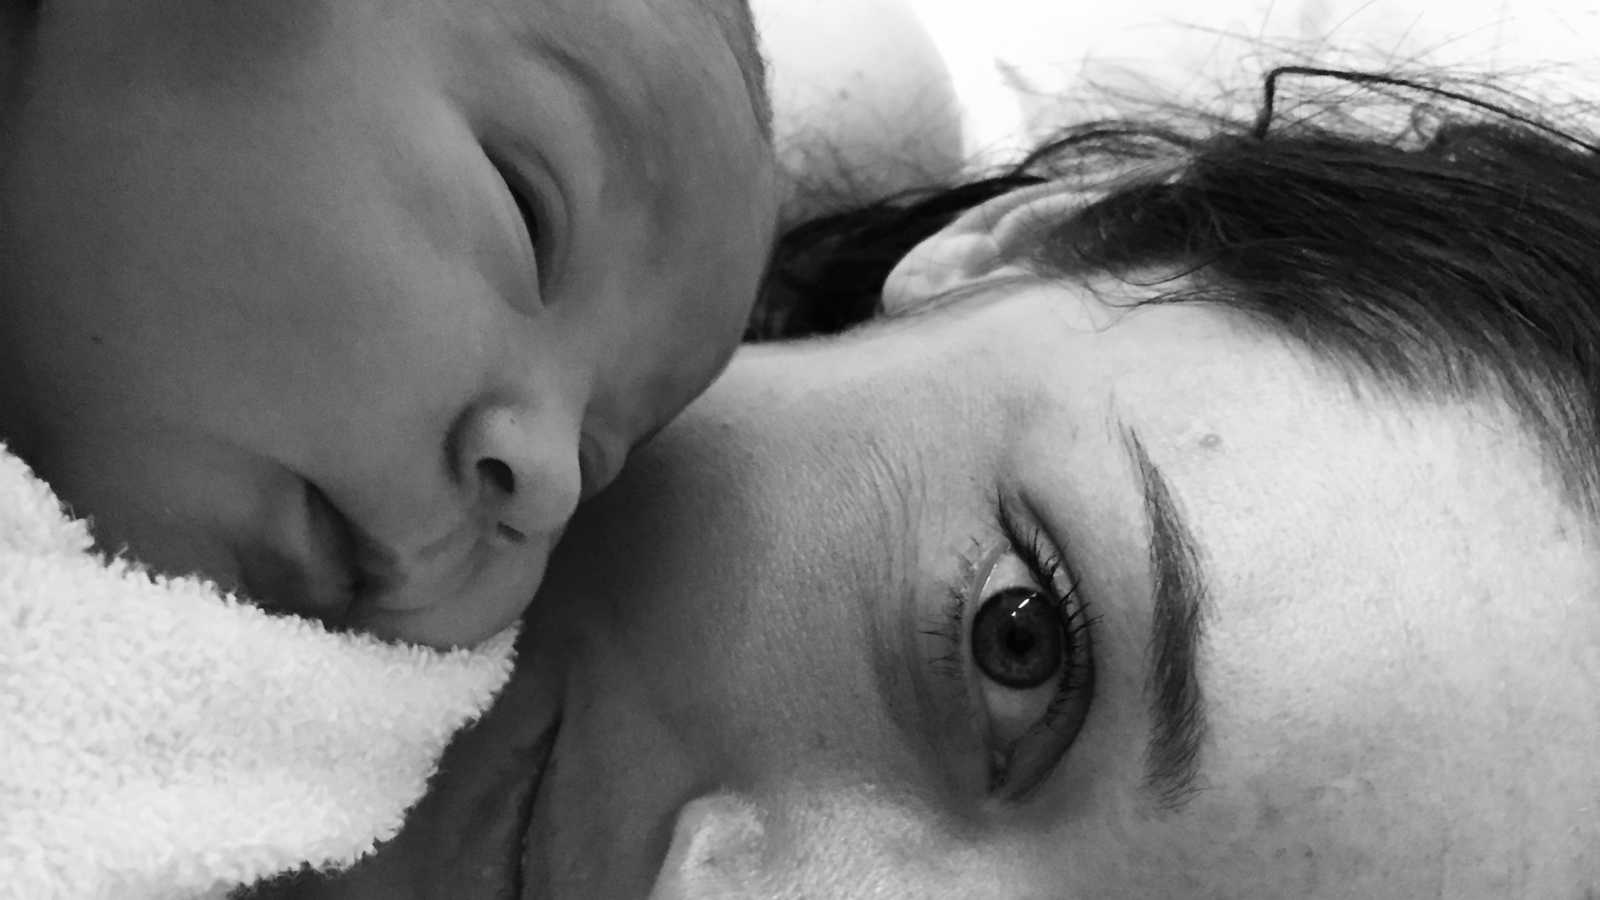 Woman who had c-section lies with eyes open while baby sleeps on her